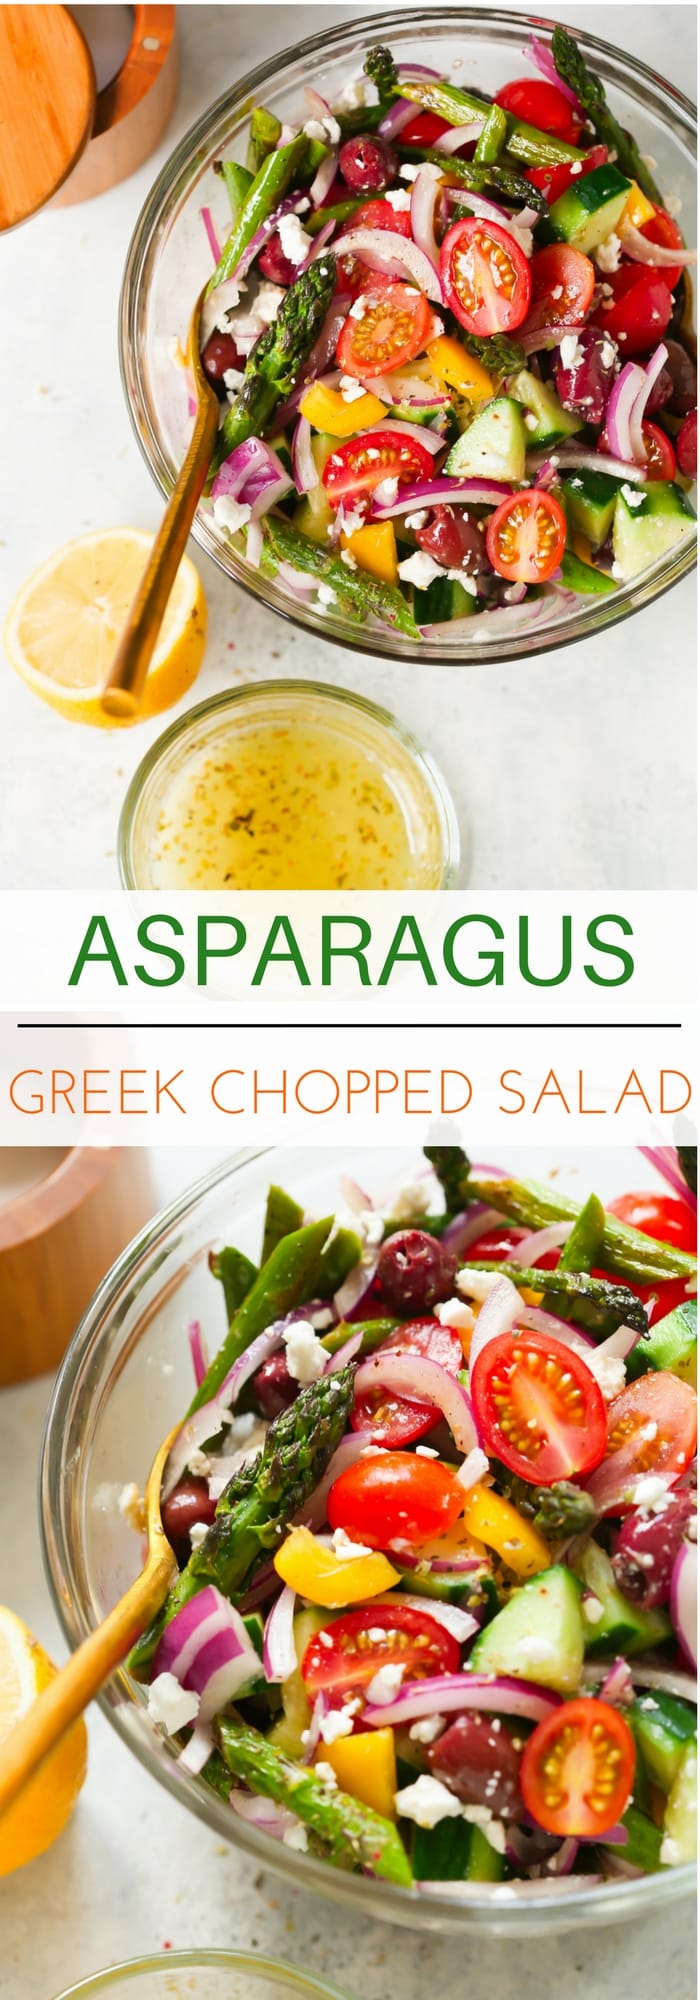 Asparagus Greek Chopped Salad - This Asparagus Greek Chopped Salad is made with roasted asparagus, cucumber, tomatoes, black olives, feta cheese and flavored with an easy lemon dressing.